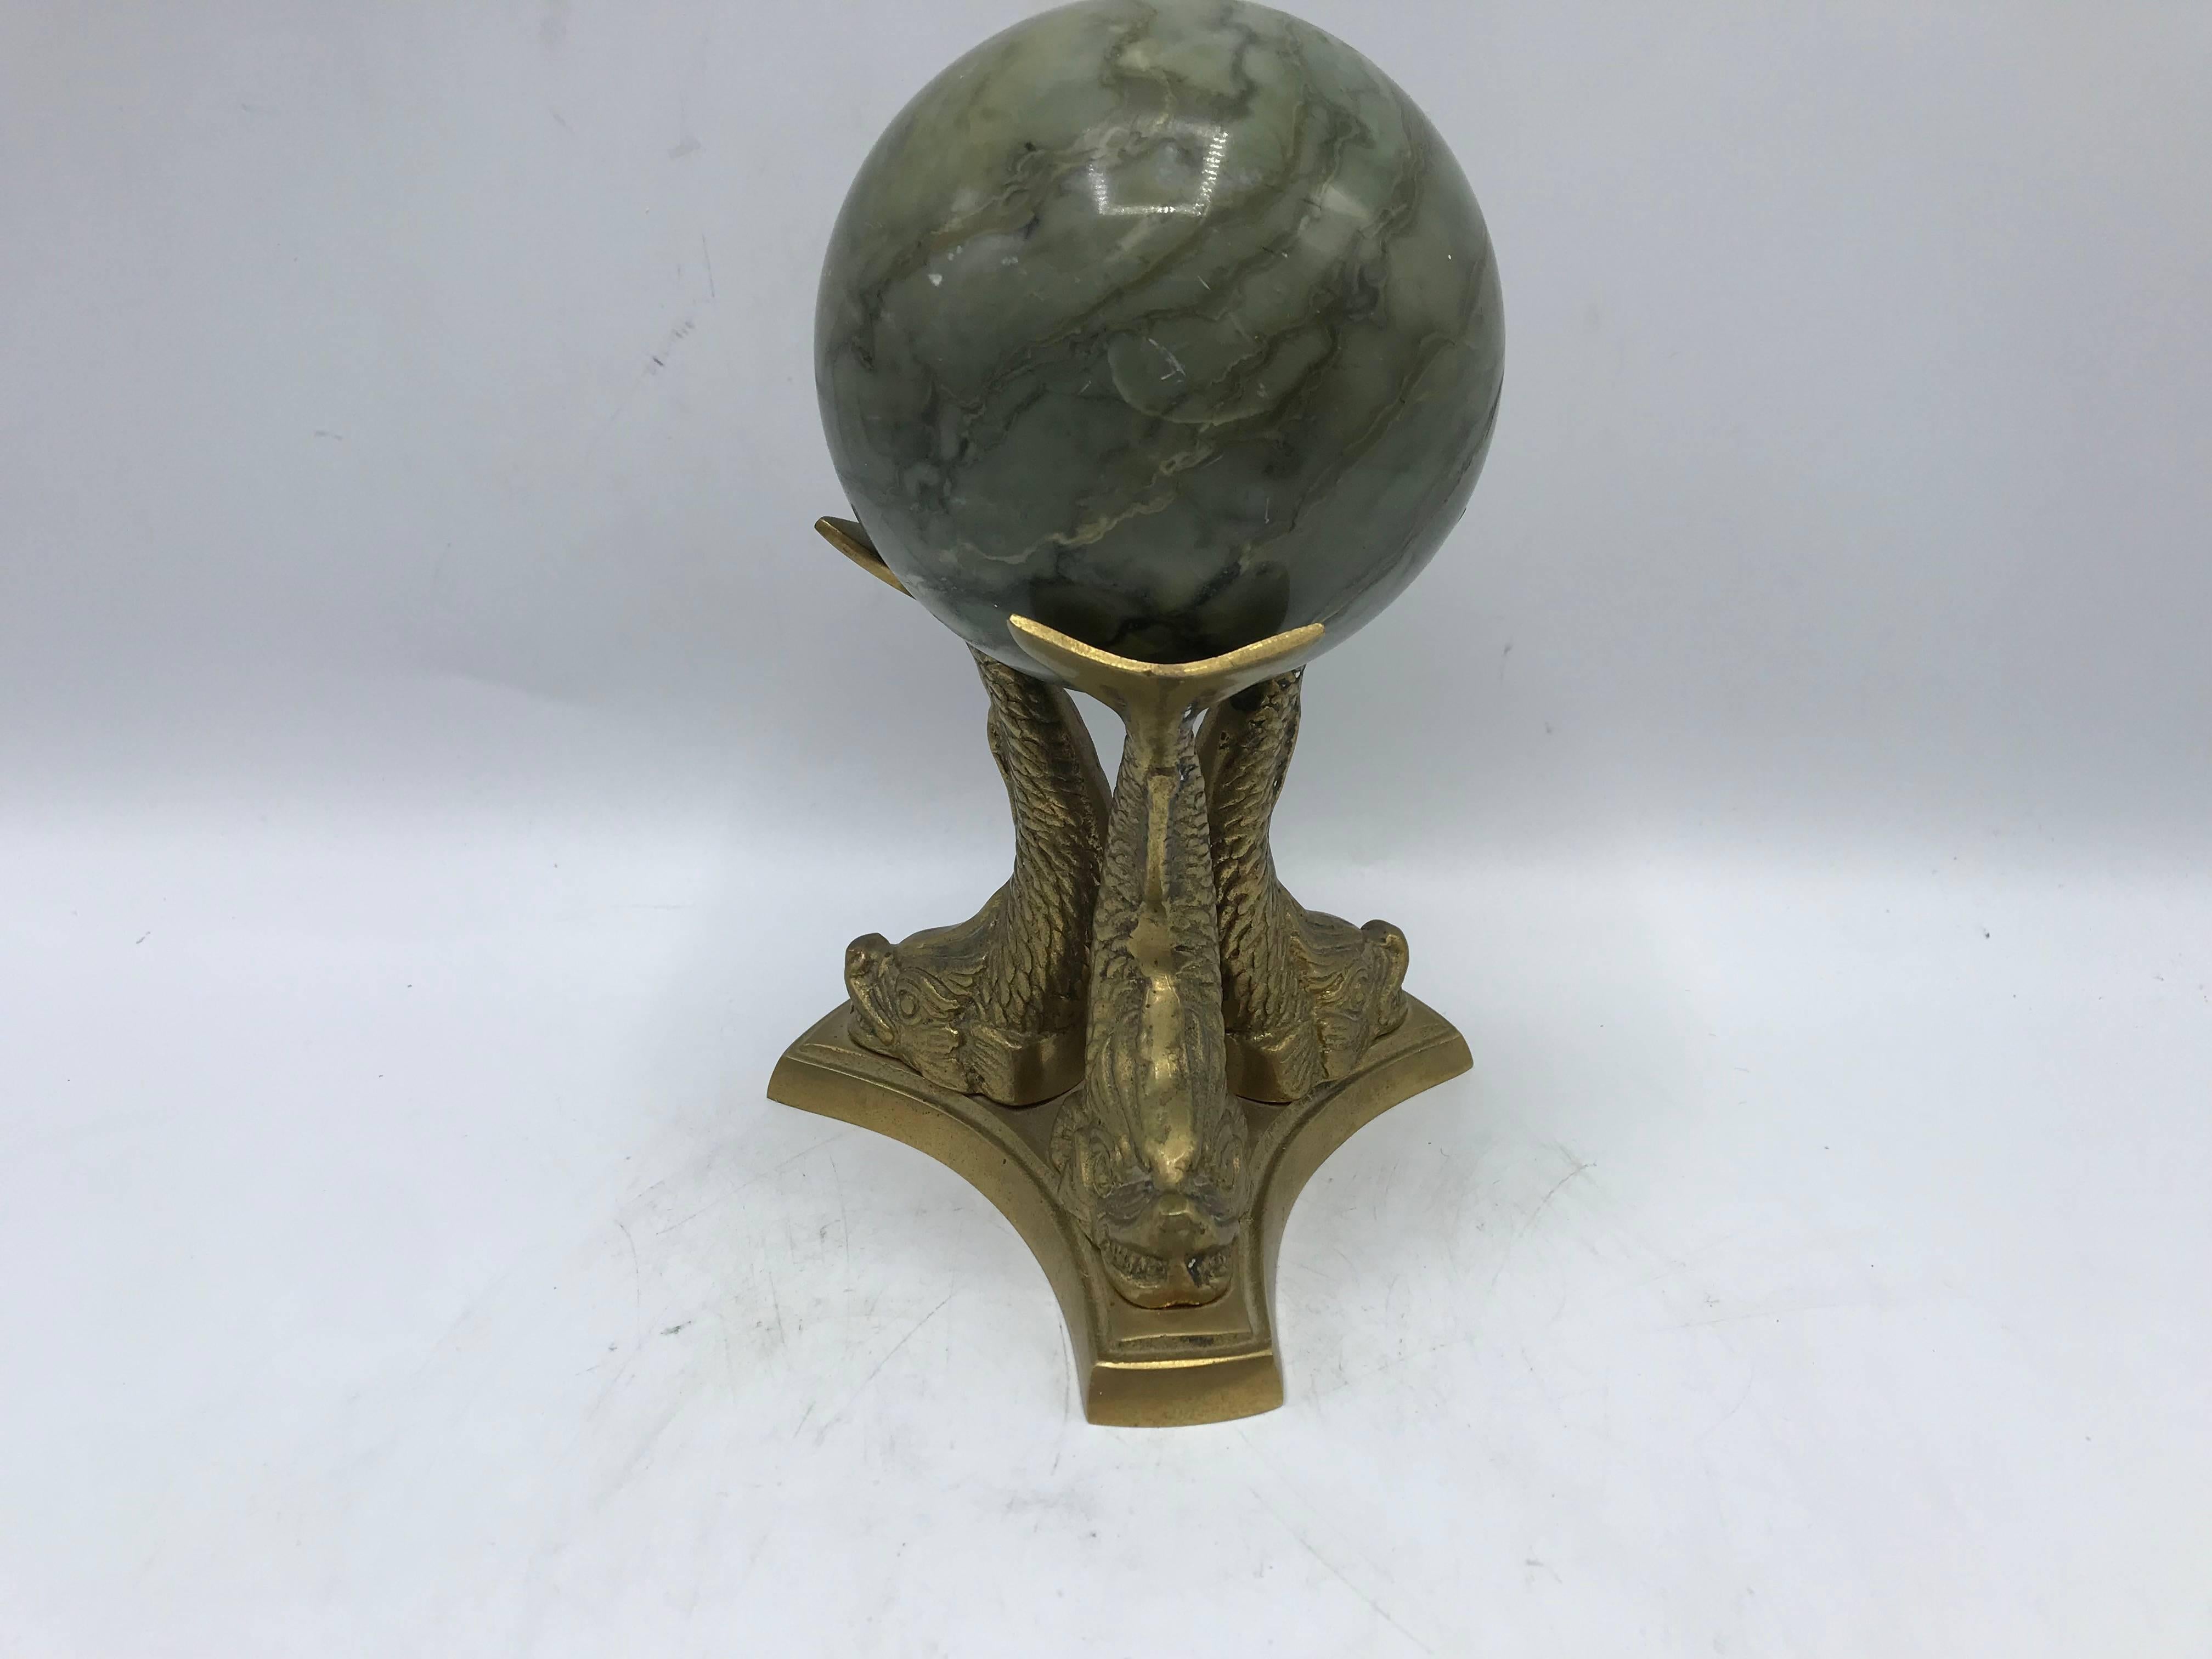 Offered is a beautiful, 1970s Italian green solid-marble ball sculpture. The piece is rested on a brass koi fish sculptural base. Heavy, weighing just under 5 pounds.